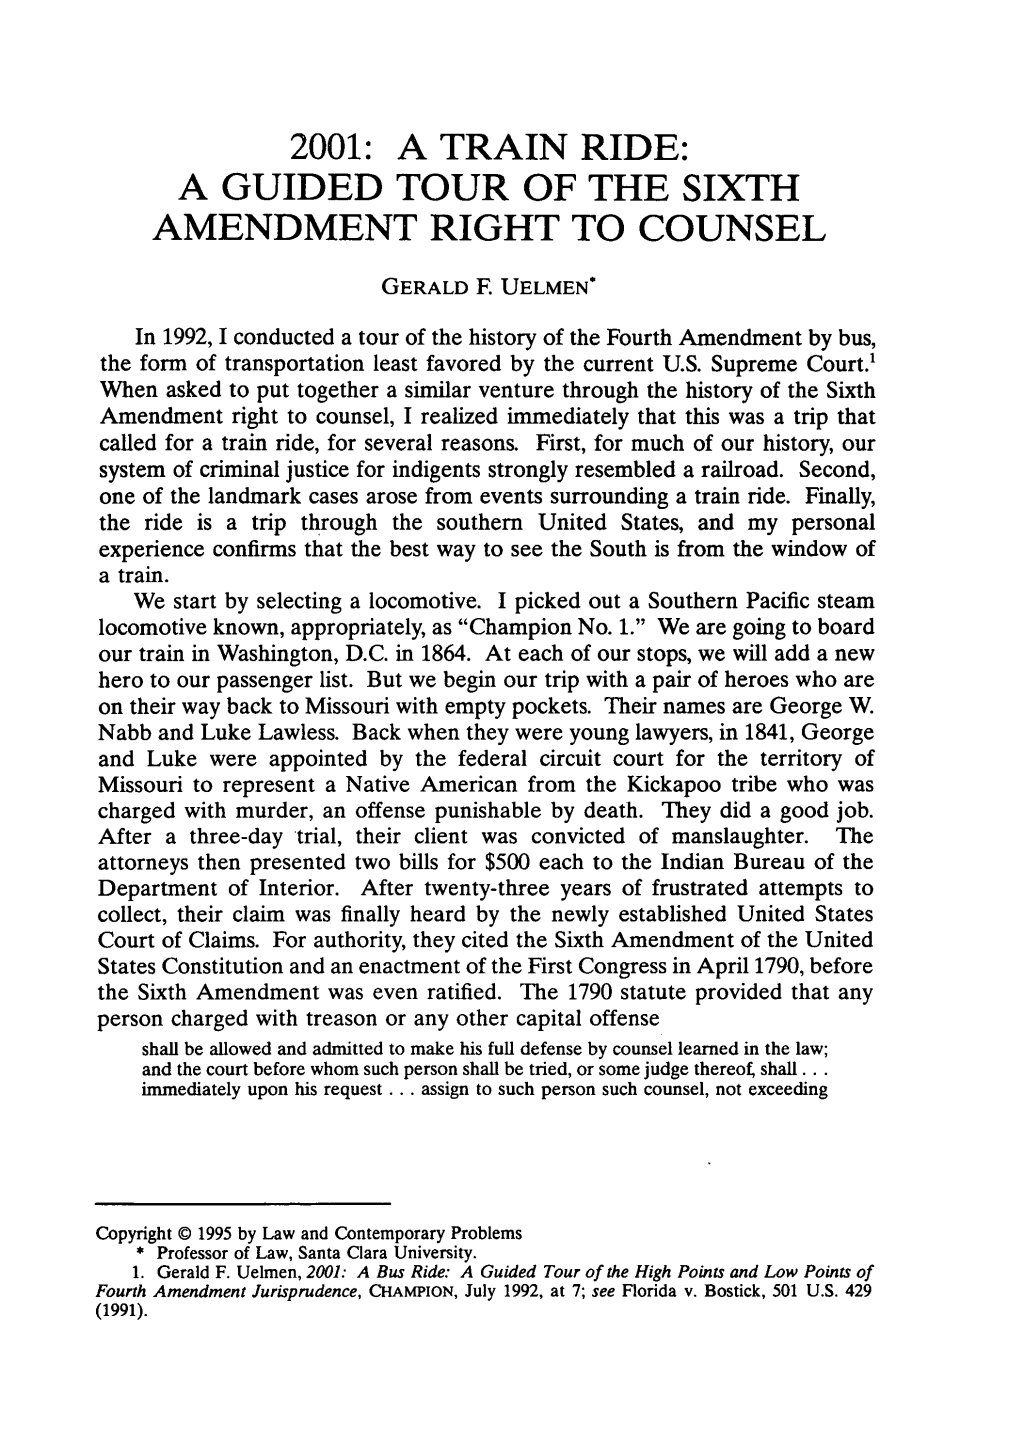 A Train Ride: a Guided Tour of the Sixth Amendment Right to Counsel